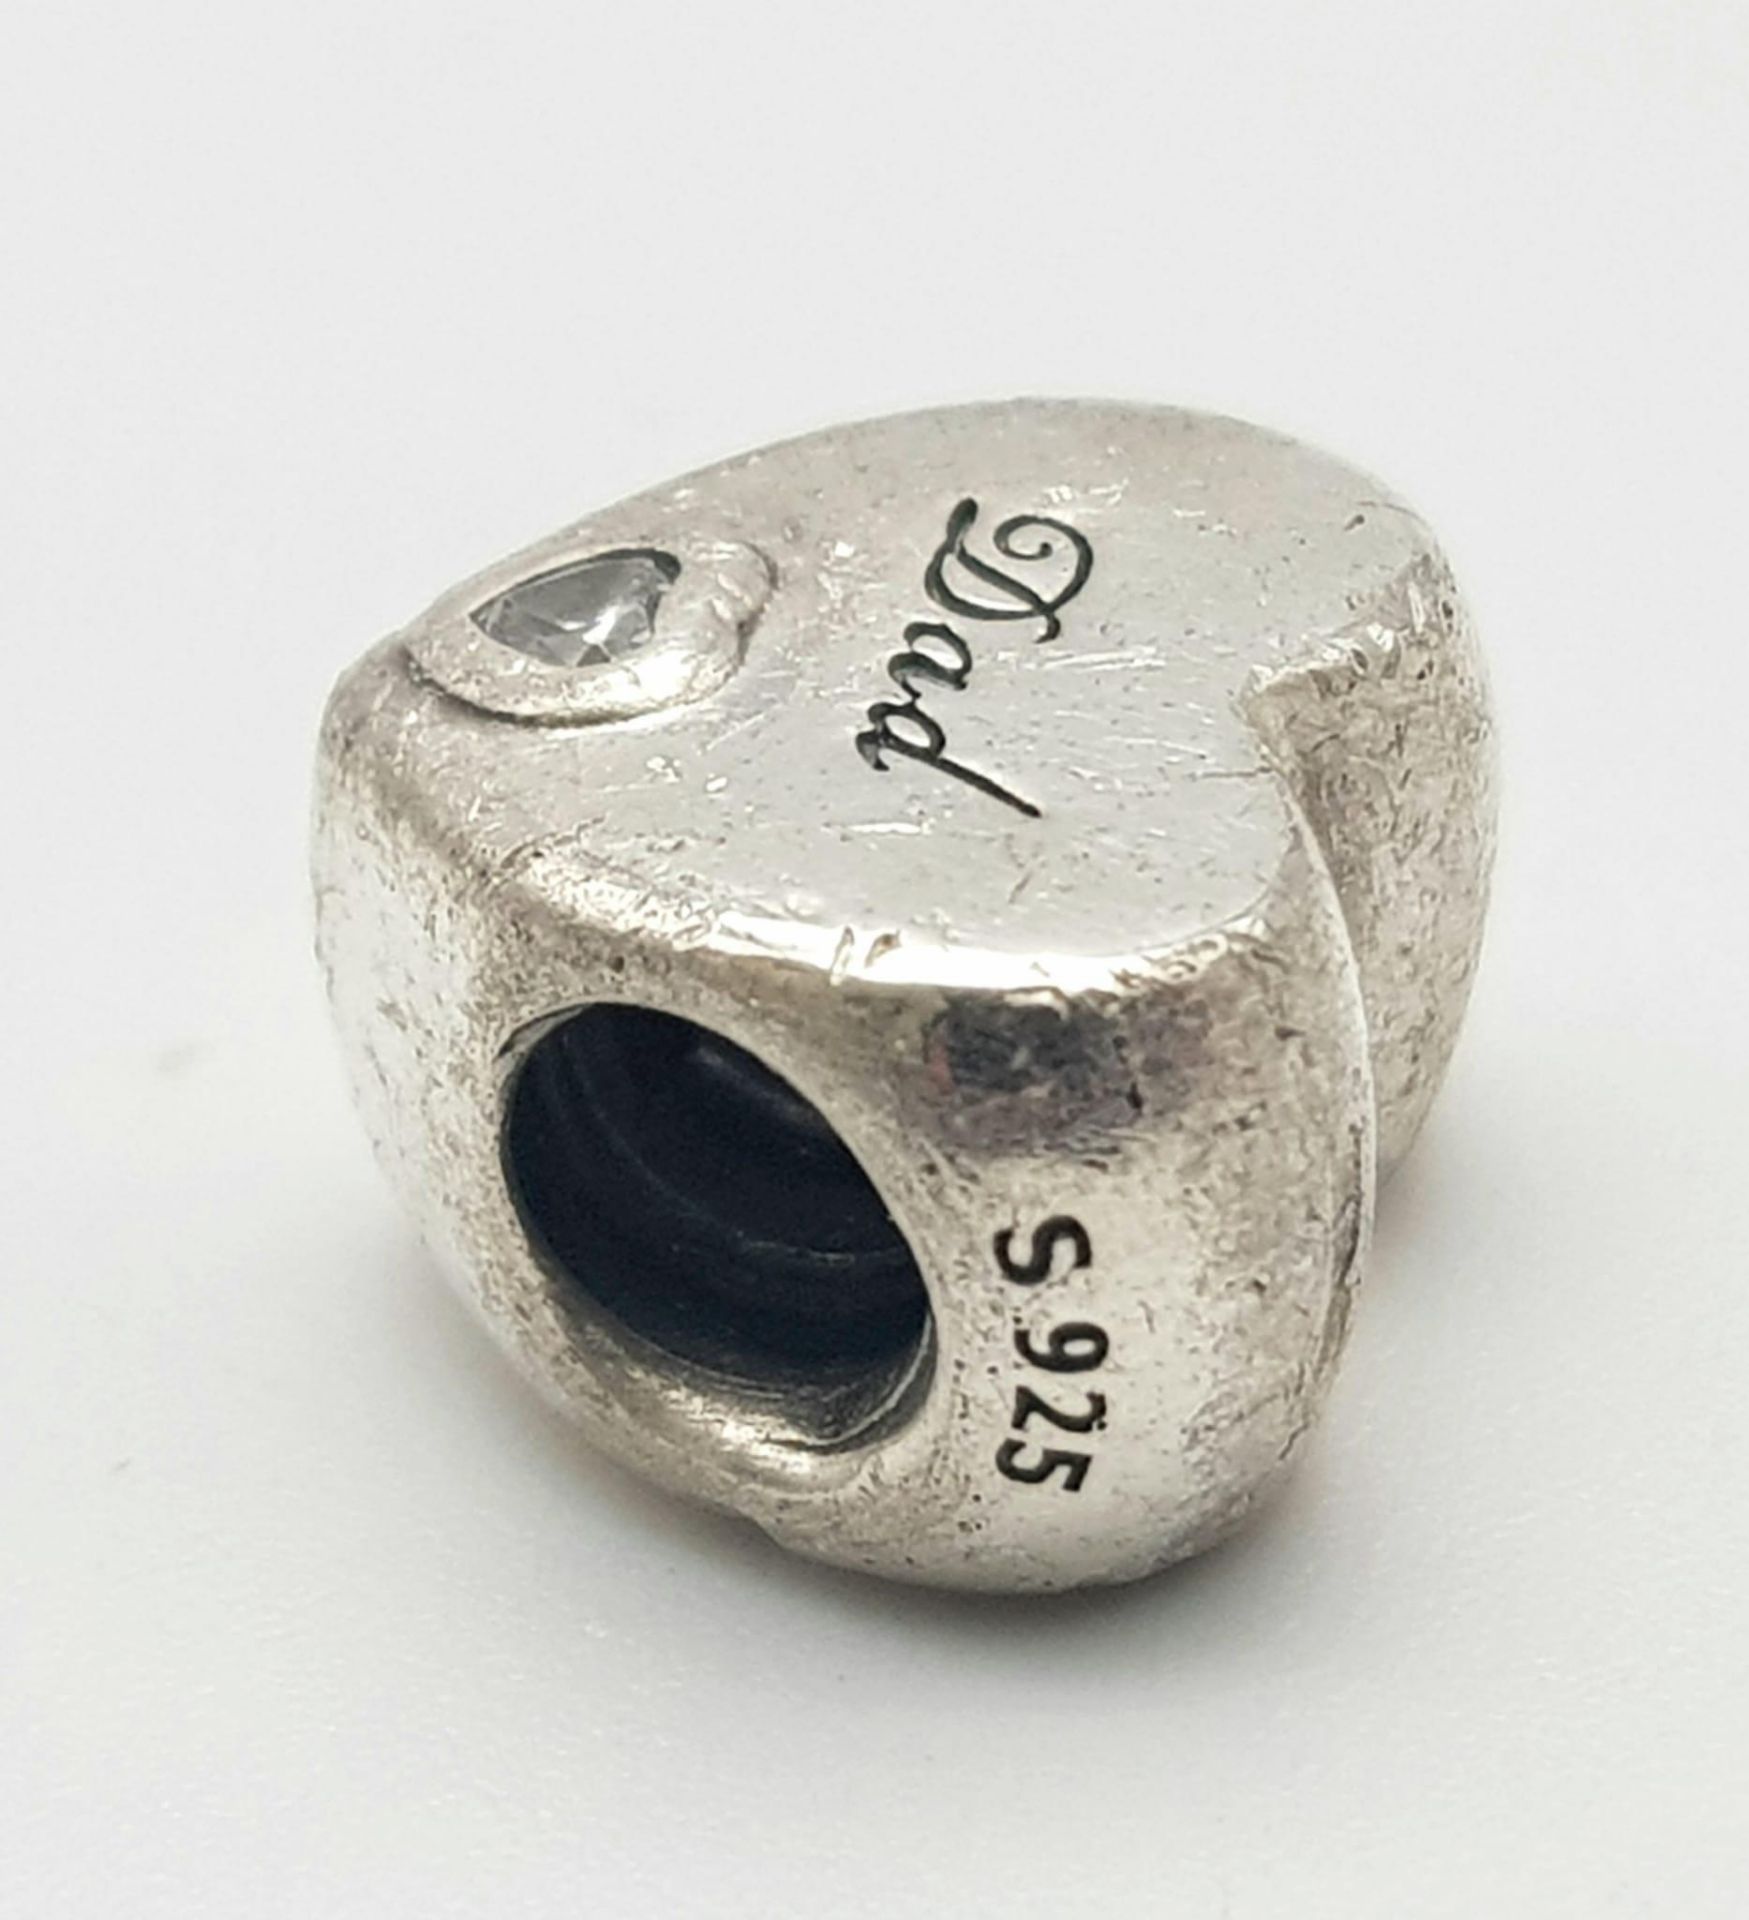 A PANDORA STERLING SILVER HEART SHAPED STONE SET CHARM, ENGRAVED WITH THE WORD "DAD" 3.9G ref: SC - Image 2 of 7